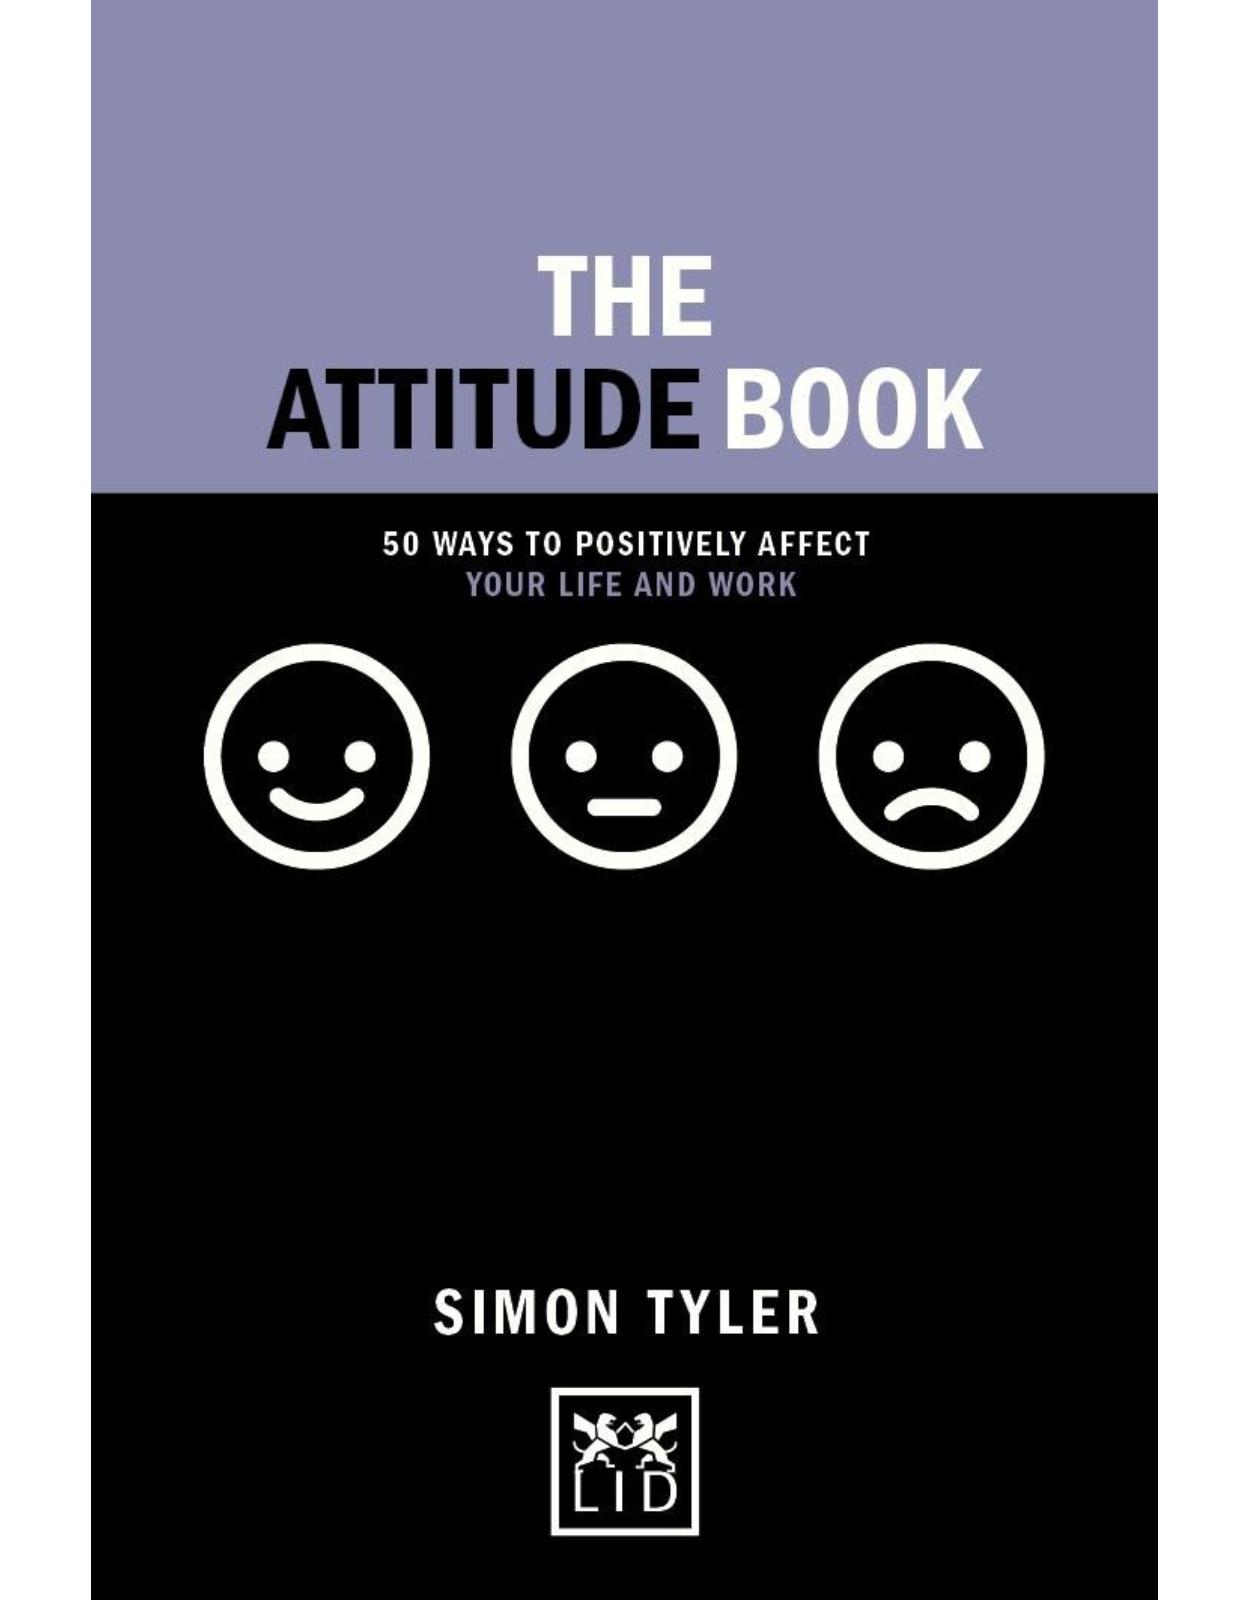 The Attitude Book: 50 Ways to Make Positive Change in Your Work and Life 